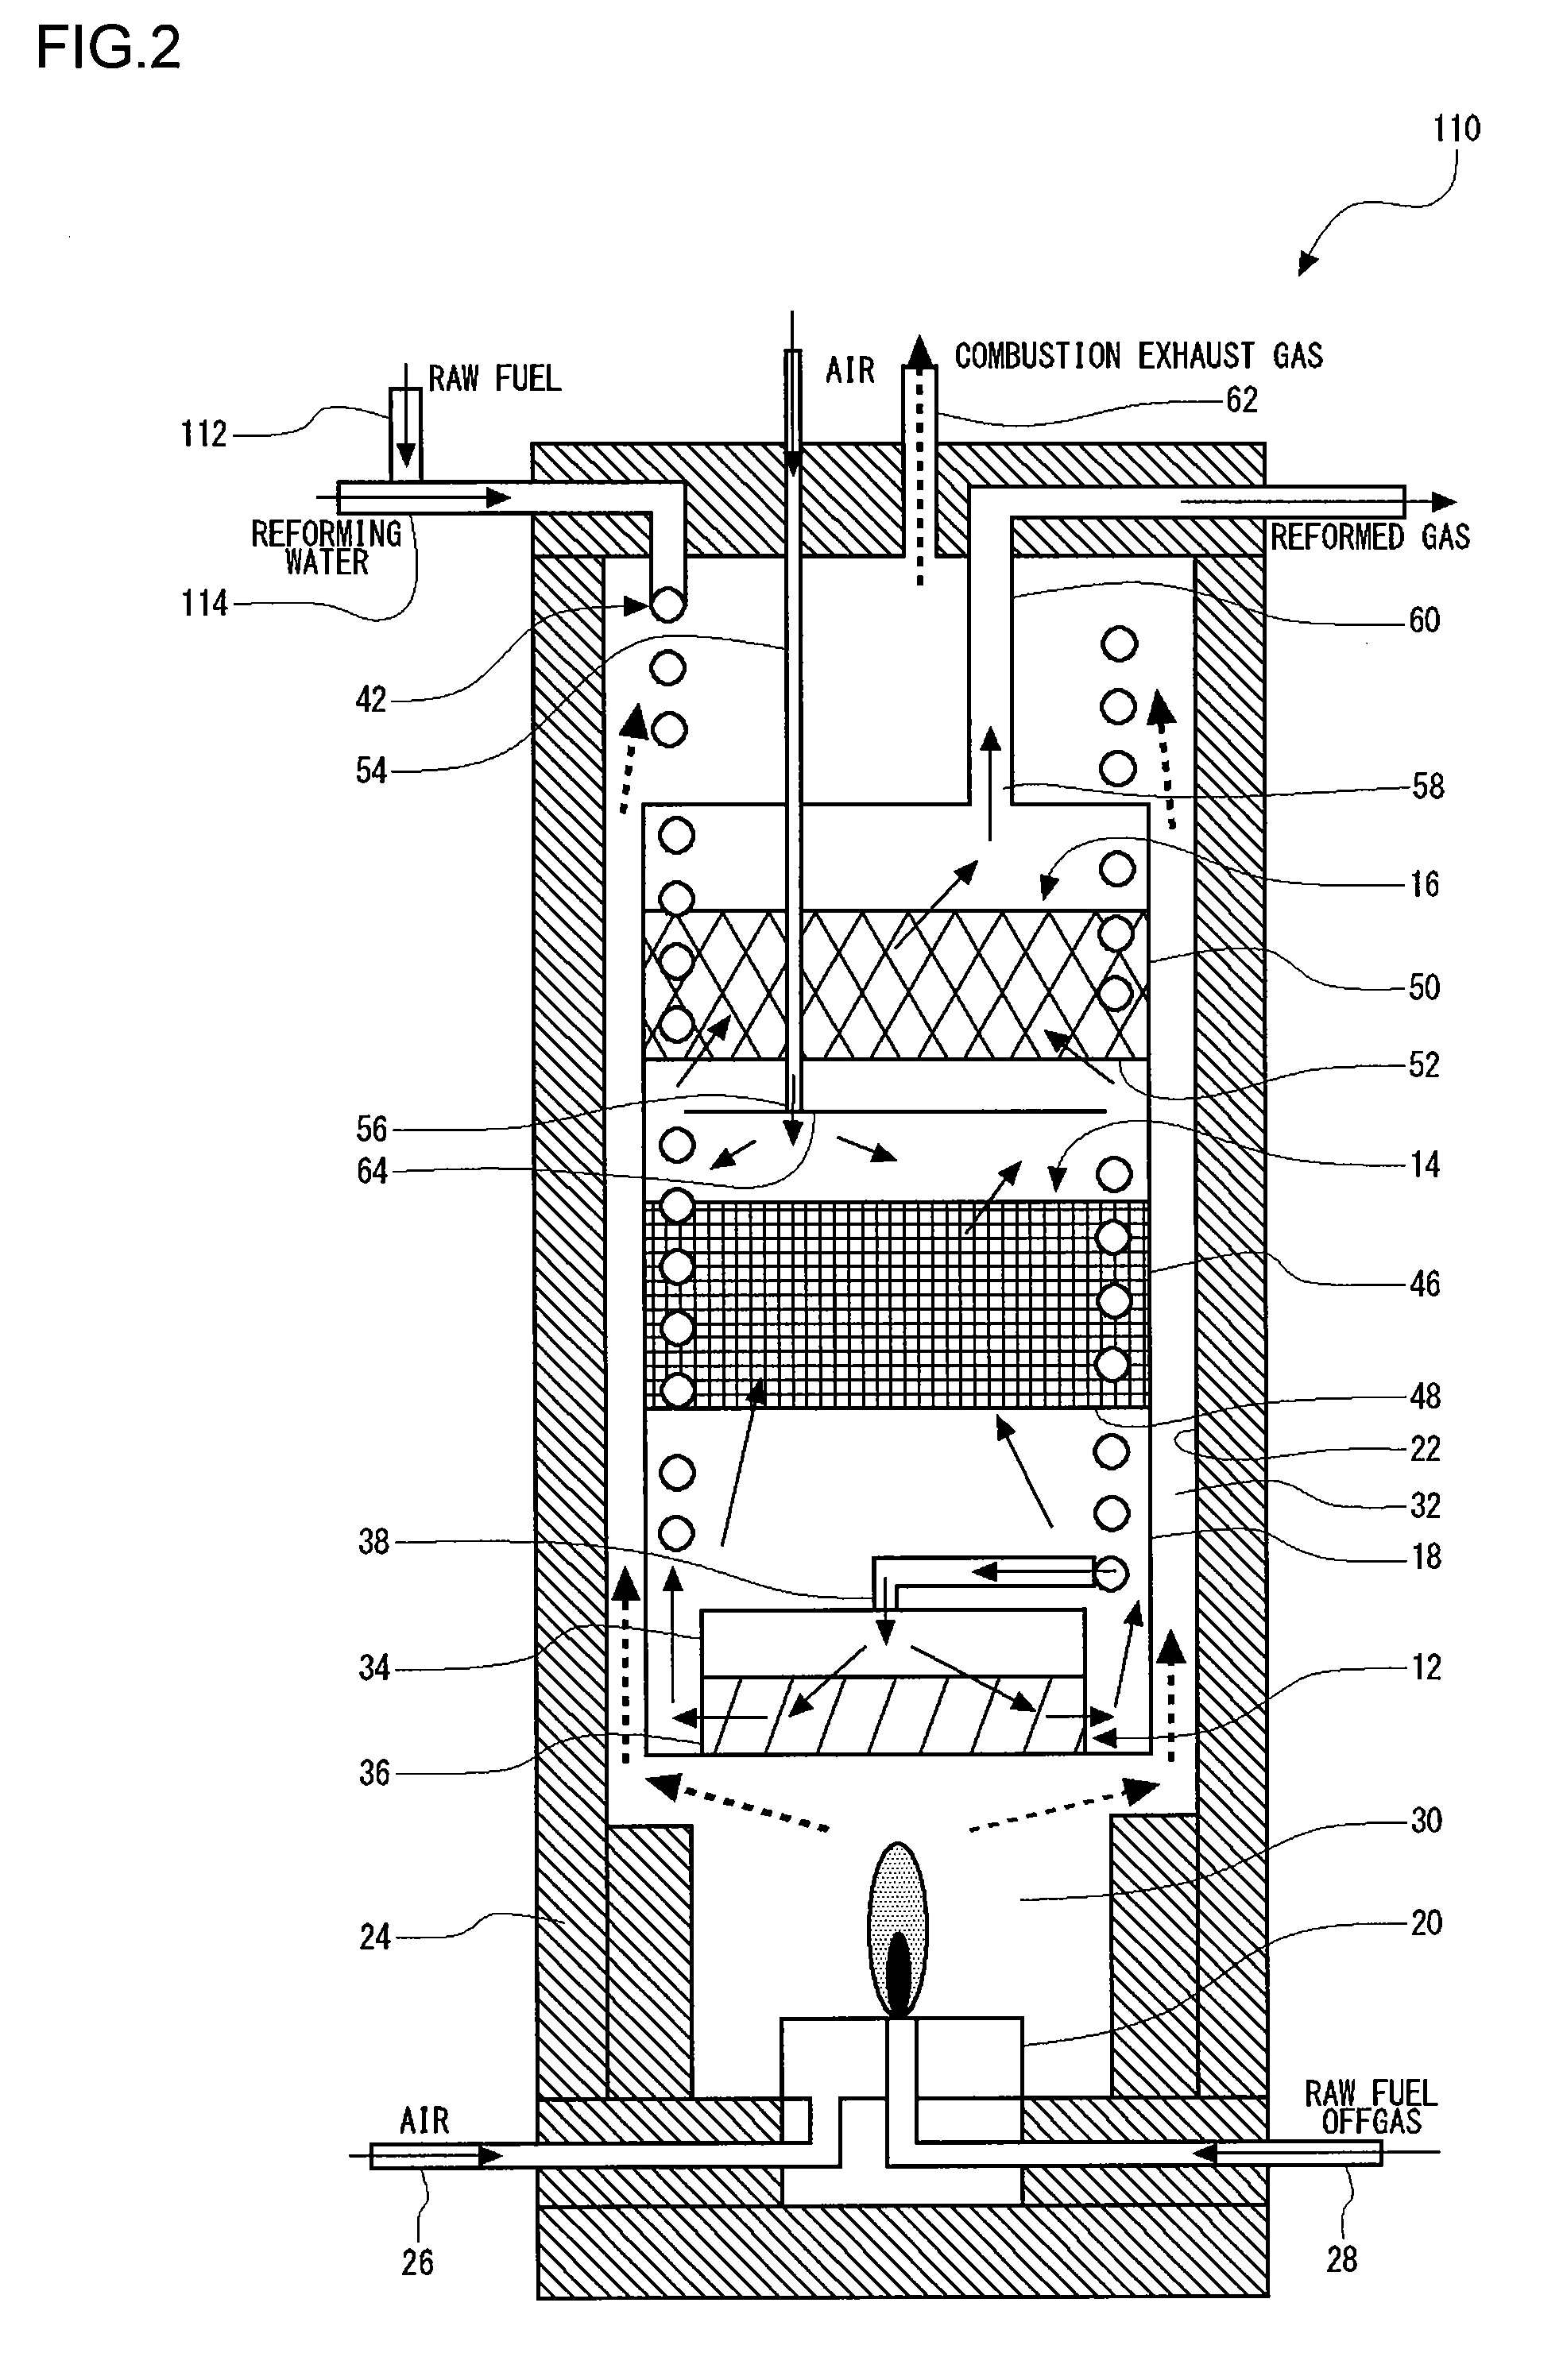 Reforming apparatus for fuel cell